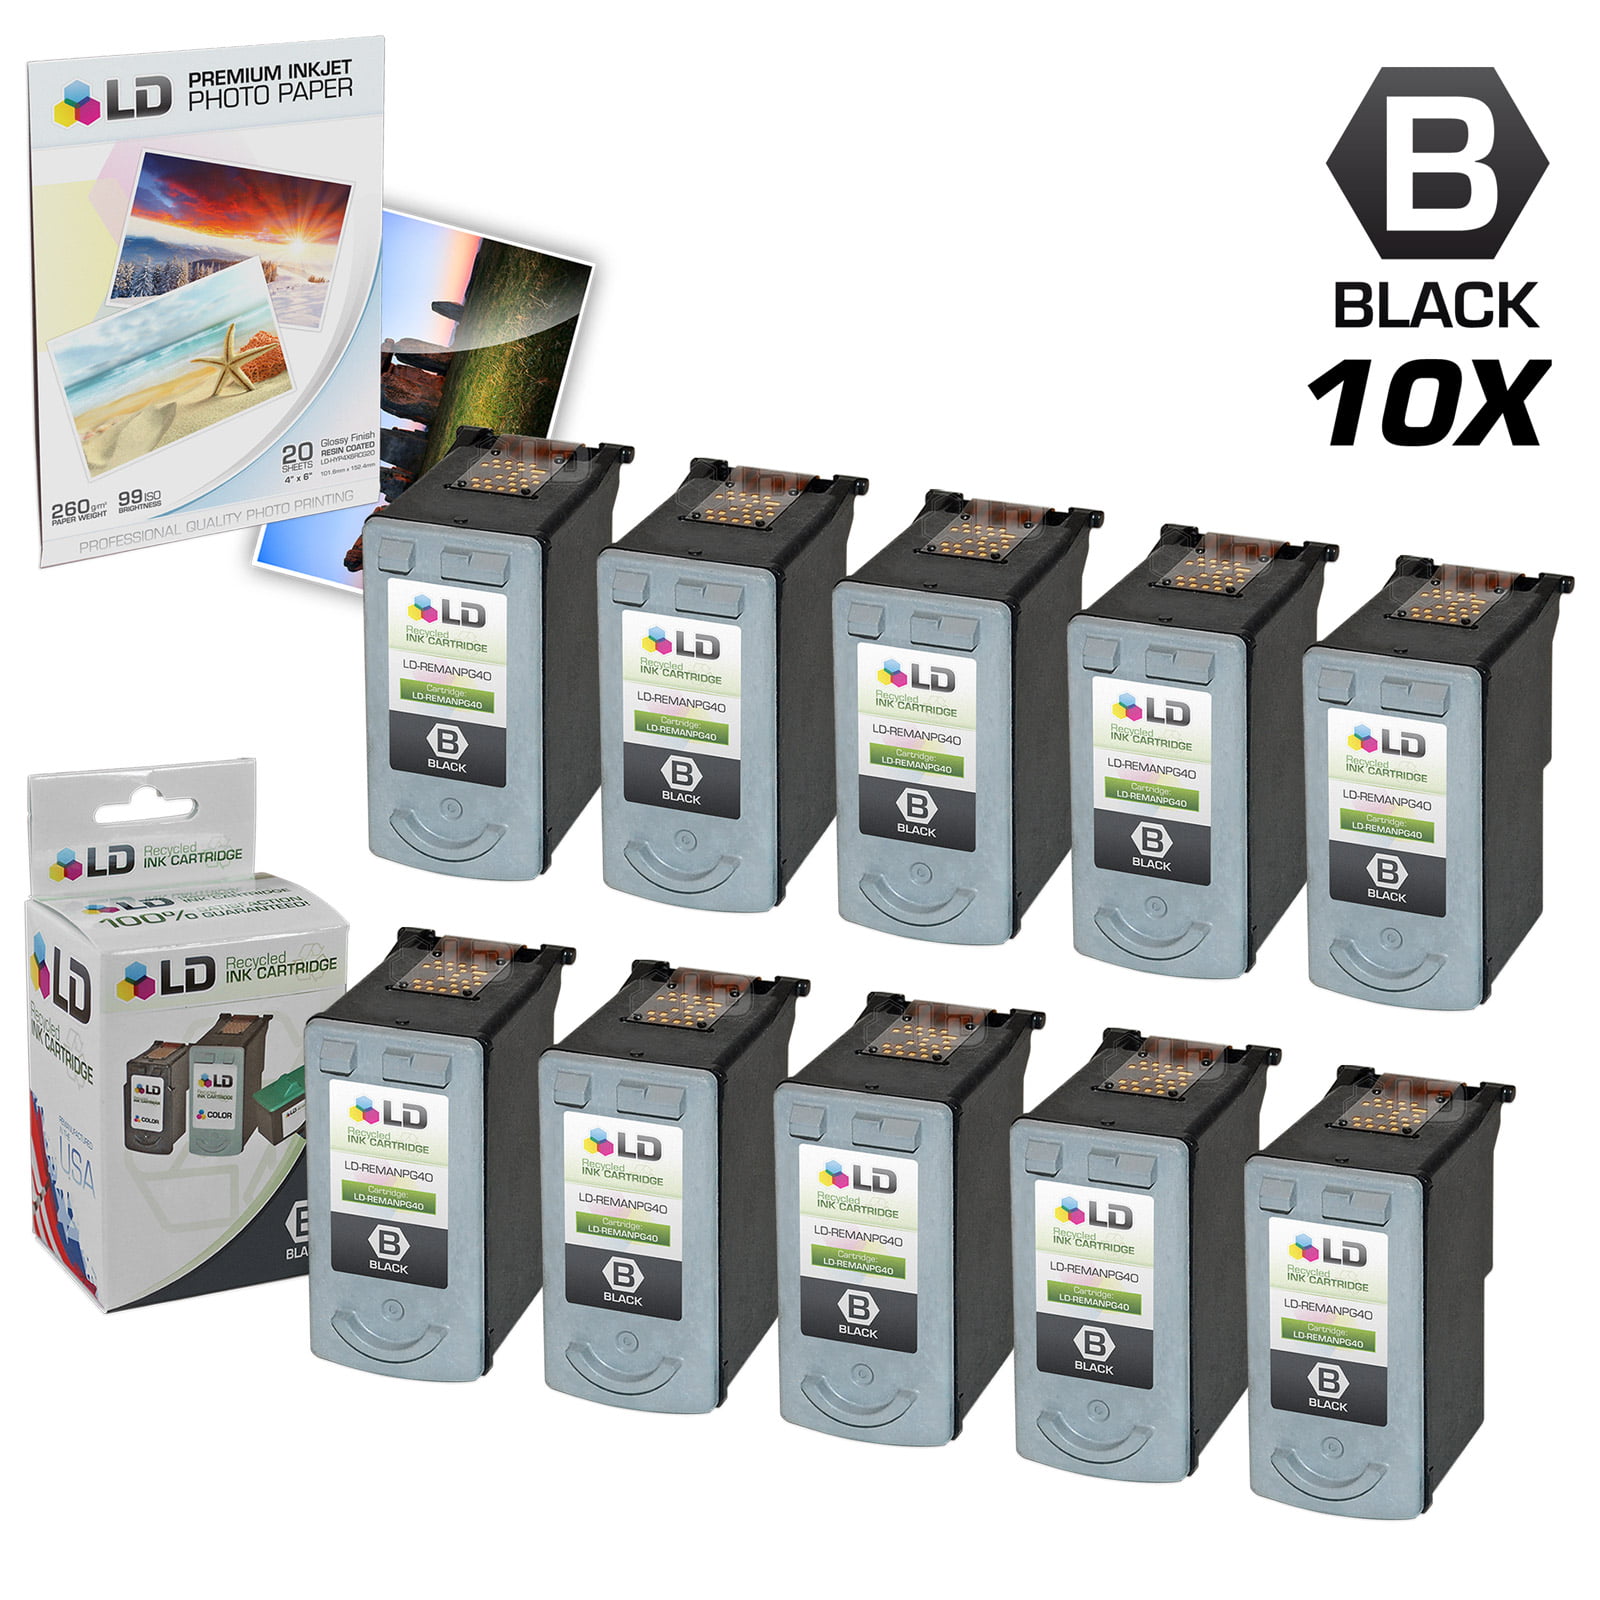 LD Remanufactured Ink Cartridge Replacement for Canon PG-40 0615B002 Black, 10-Pack 